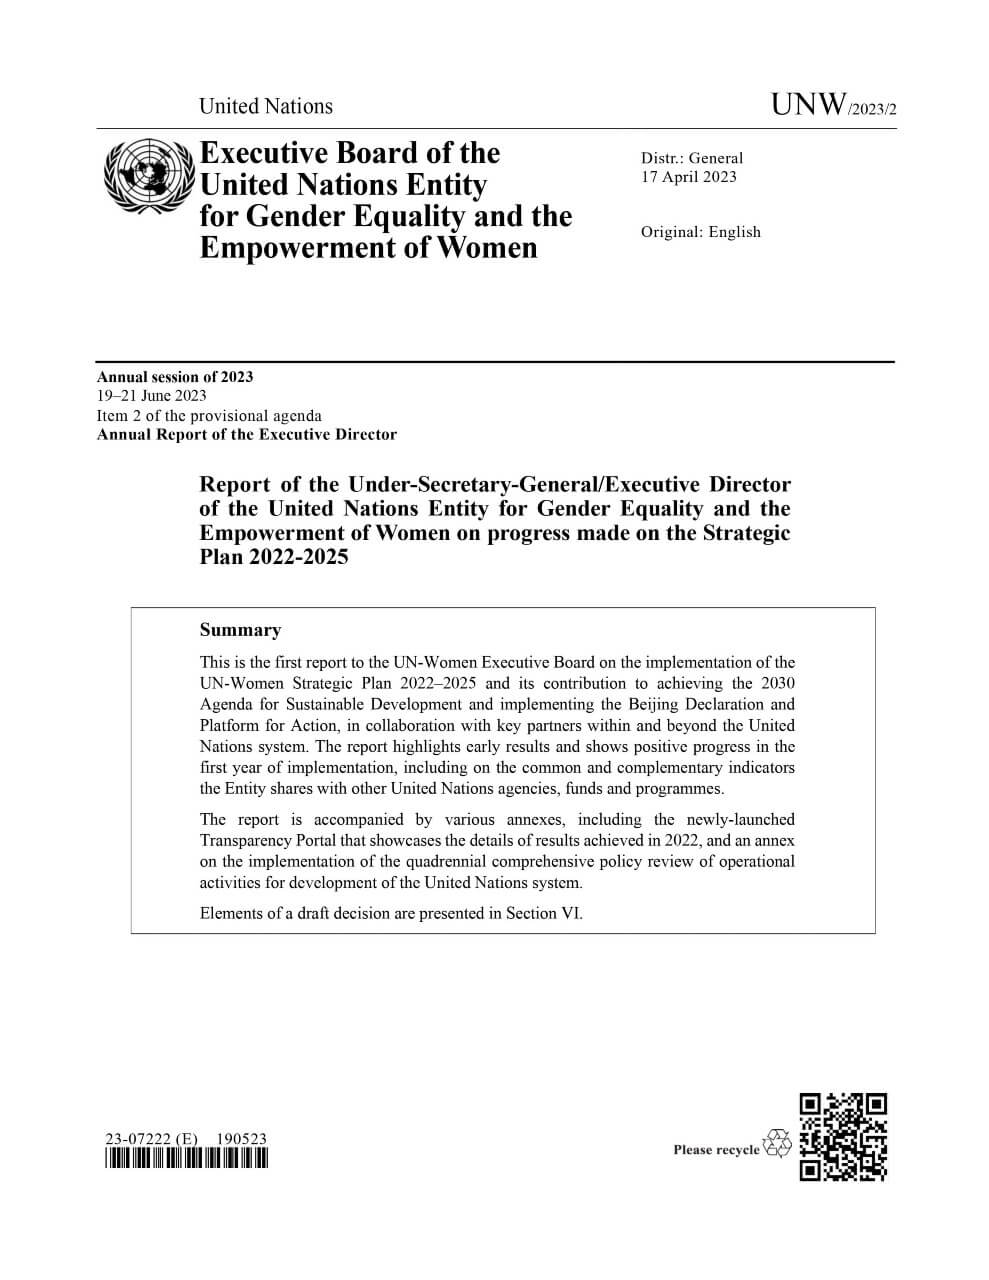 Report of the Under-Secretary-General/Executive Director of the United Nations Entity for Gender Equality and the Empowerment of Women on progress made on the Strategic Plan 2022–2025